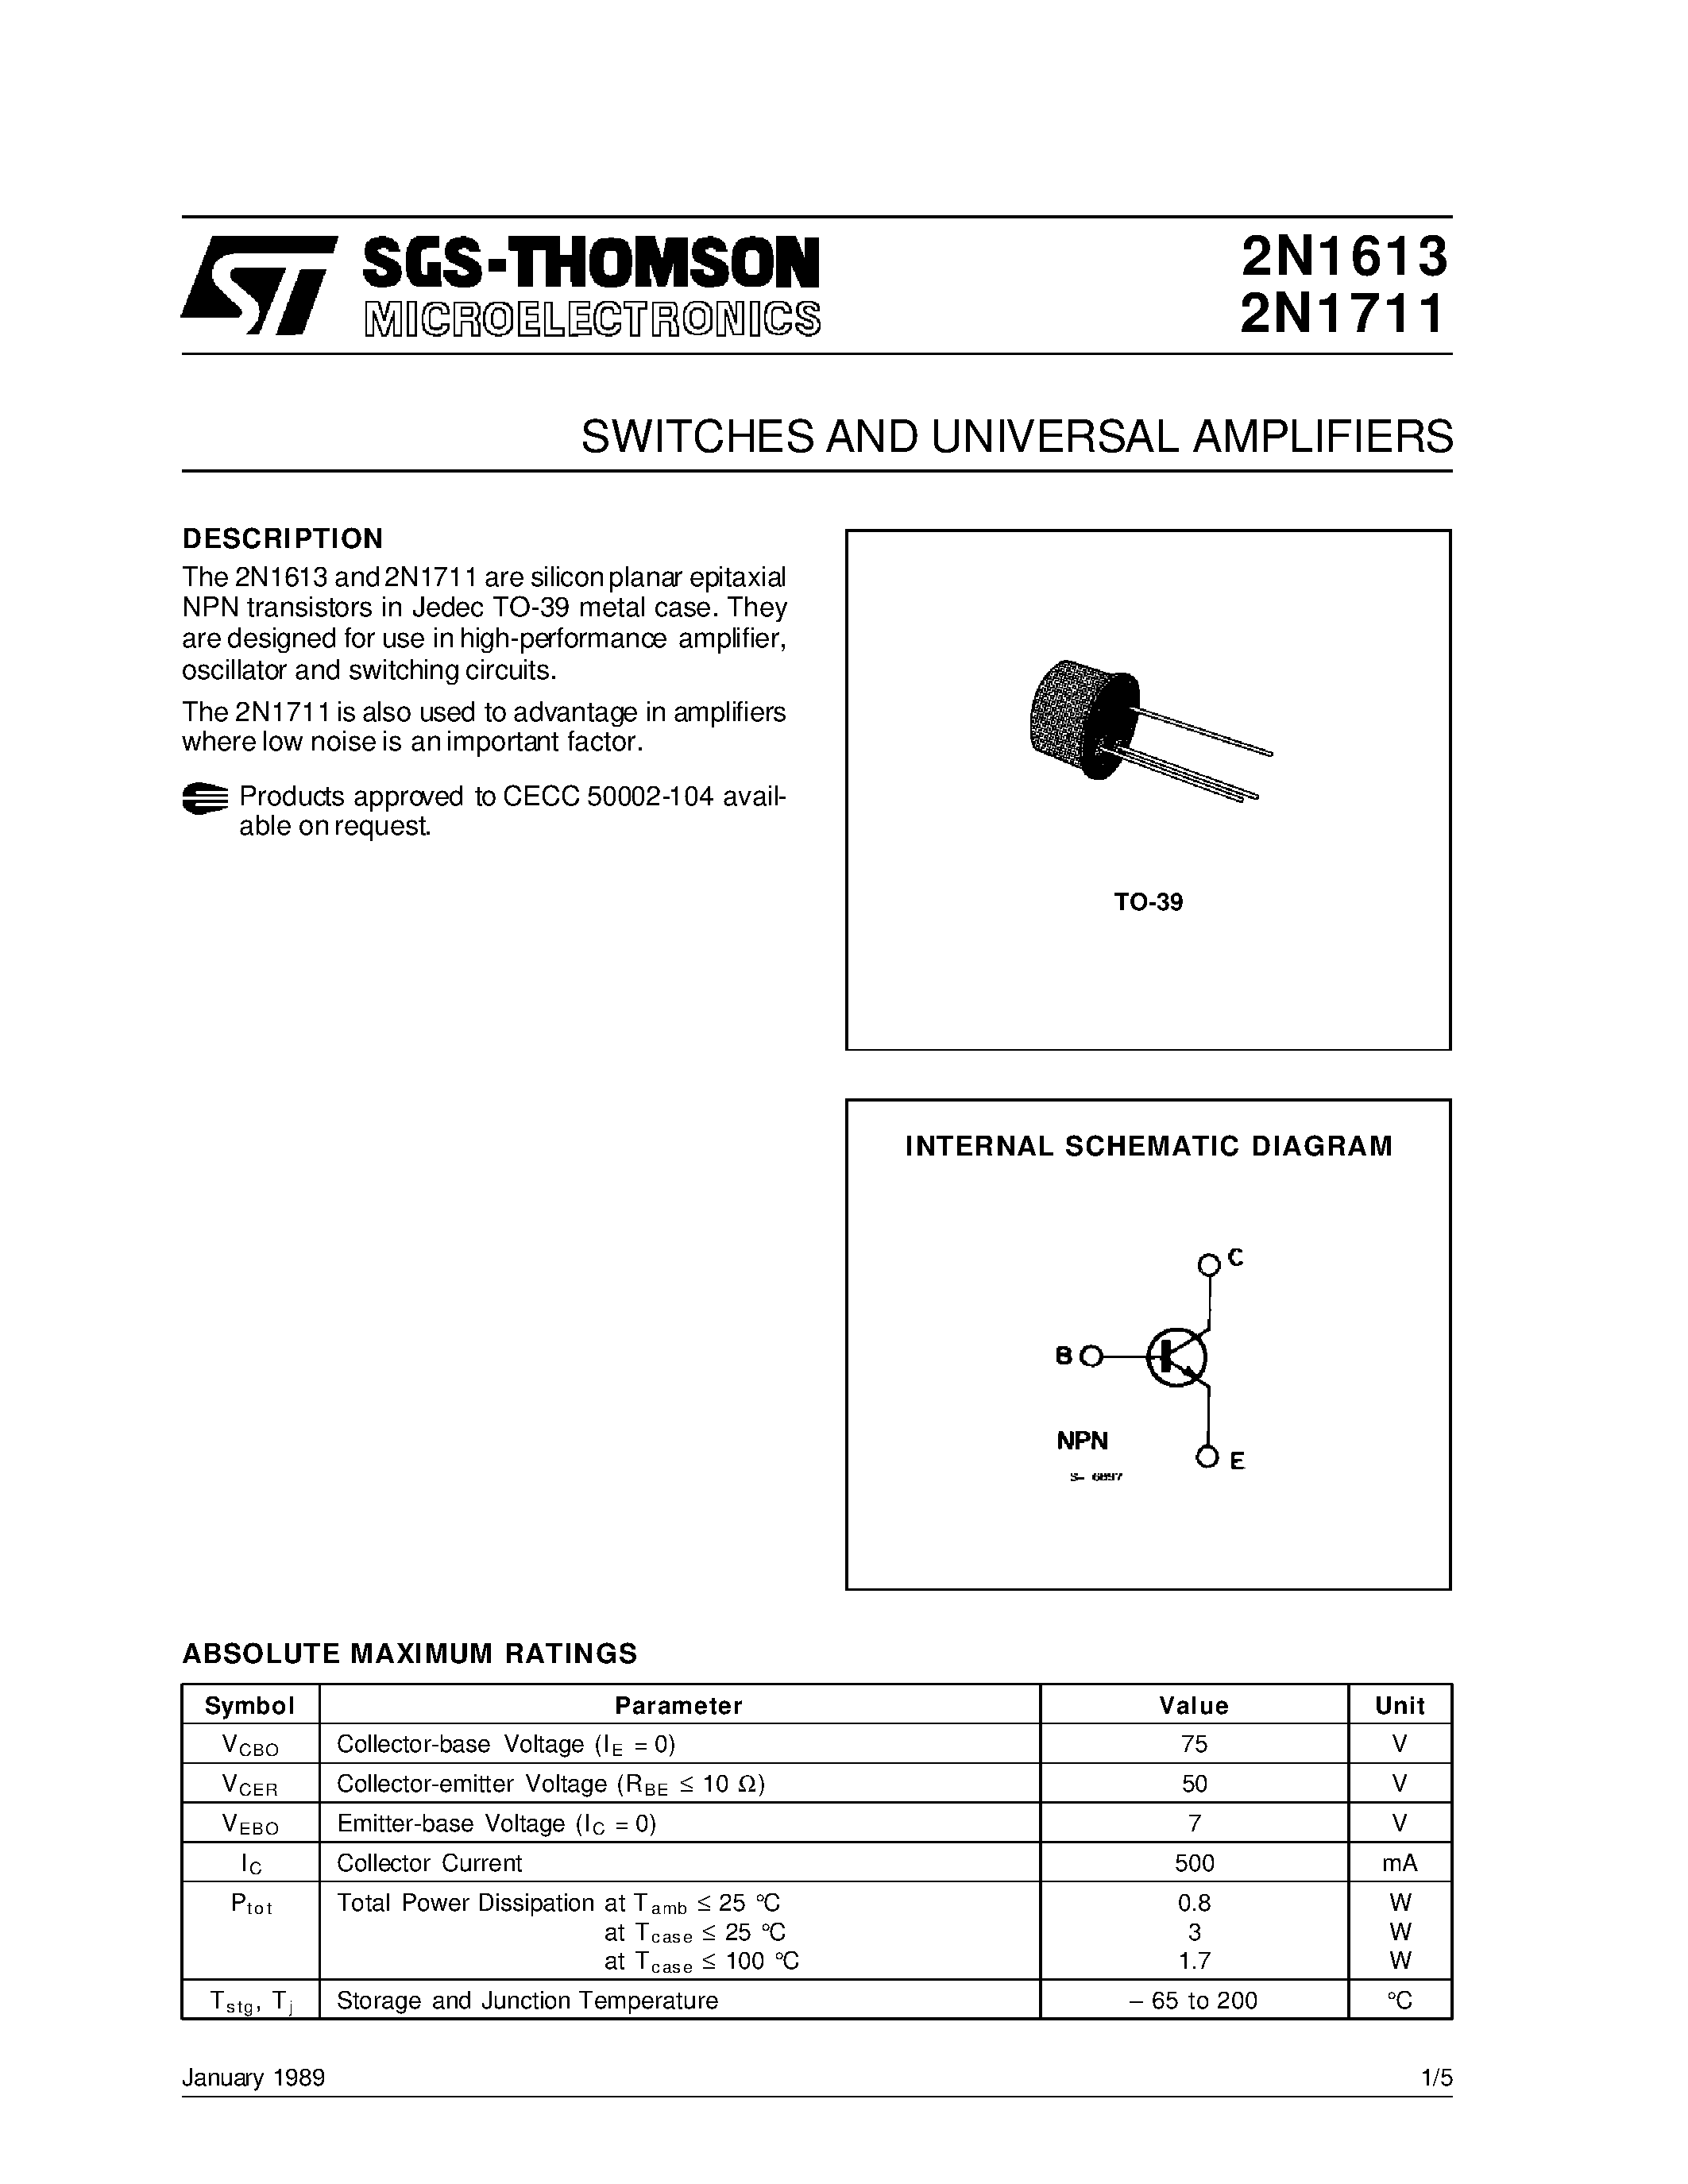 Datasheet 2N1711 - SWITCHES AND UNIVERSAL AMPLIFIERS page 1